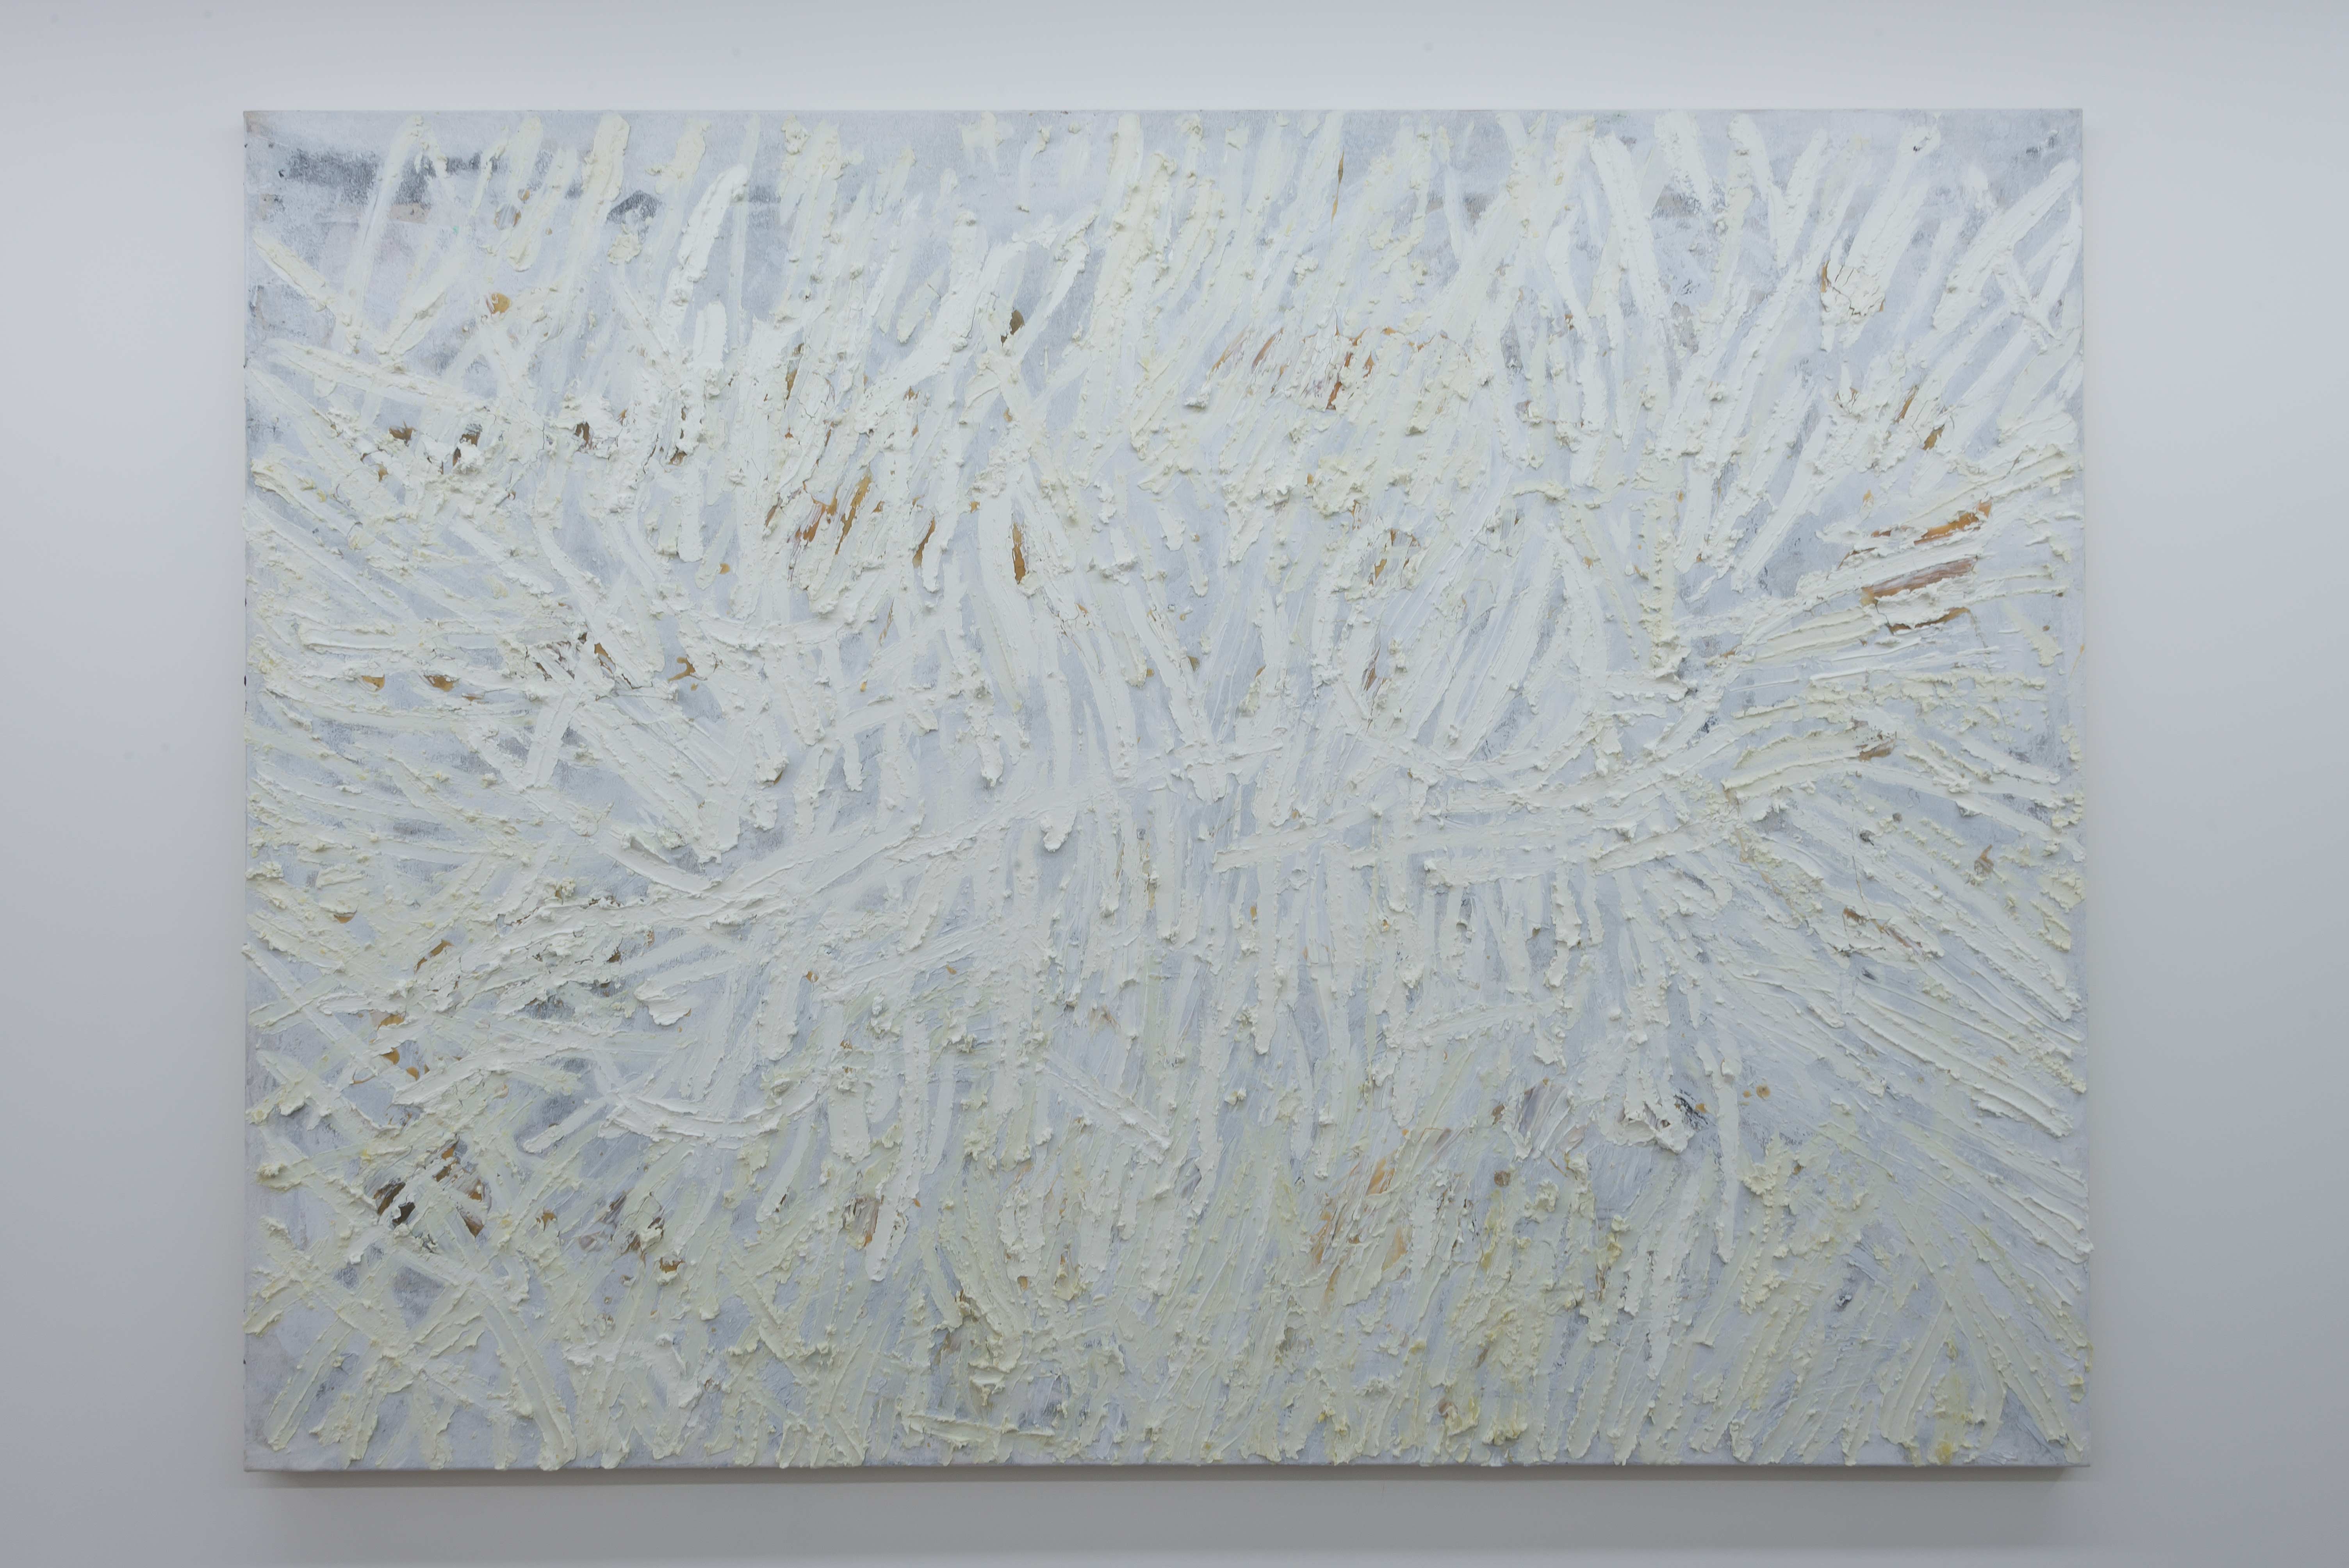 Anabel Robinson, <em>Wet Hair</em>, 2022, Ink, enamel, latex, oil and beeswax on canvas, 170 x 130cm. Photo courtesy of Asbestos.